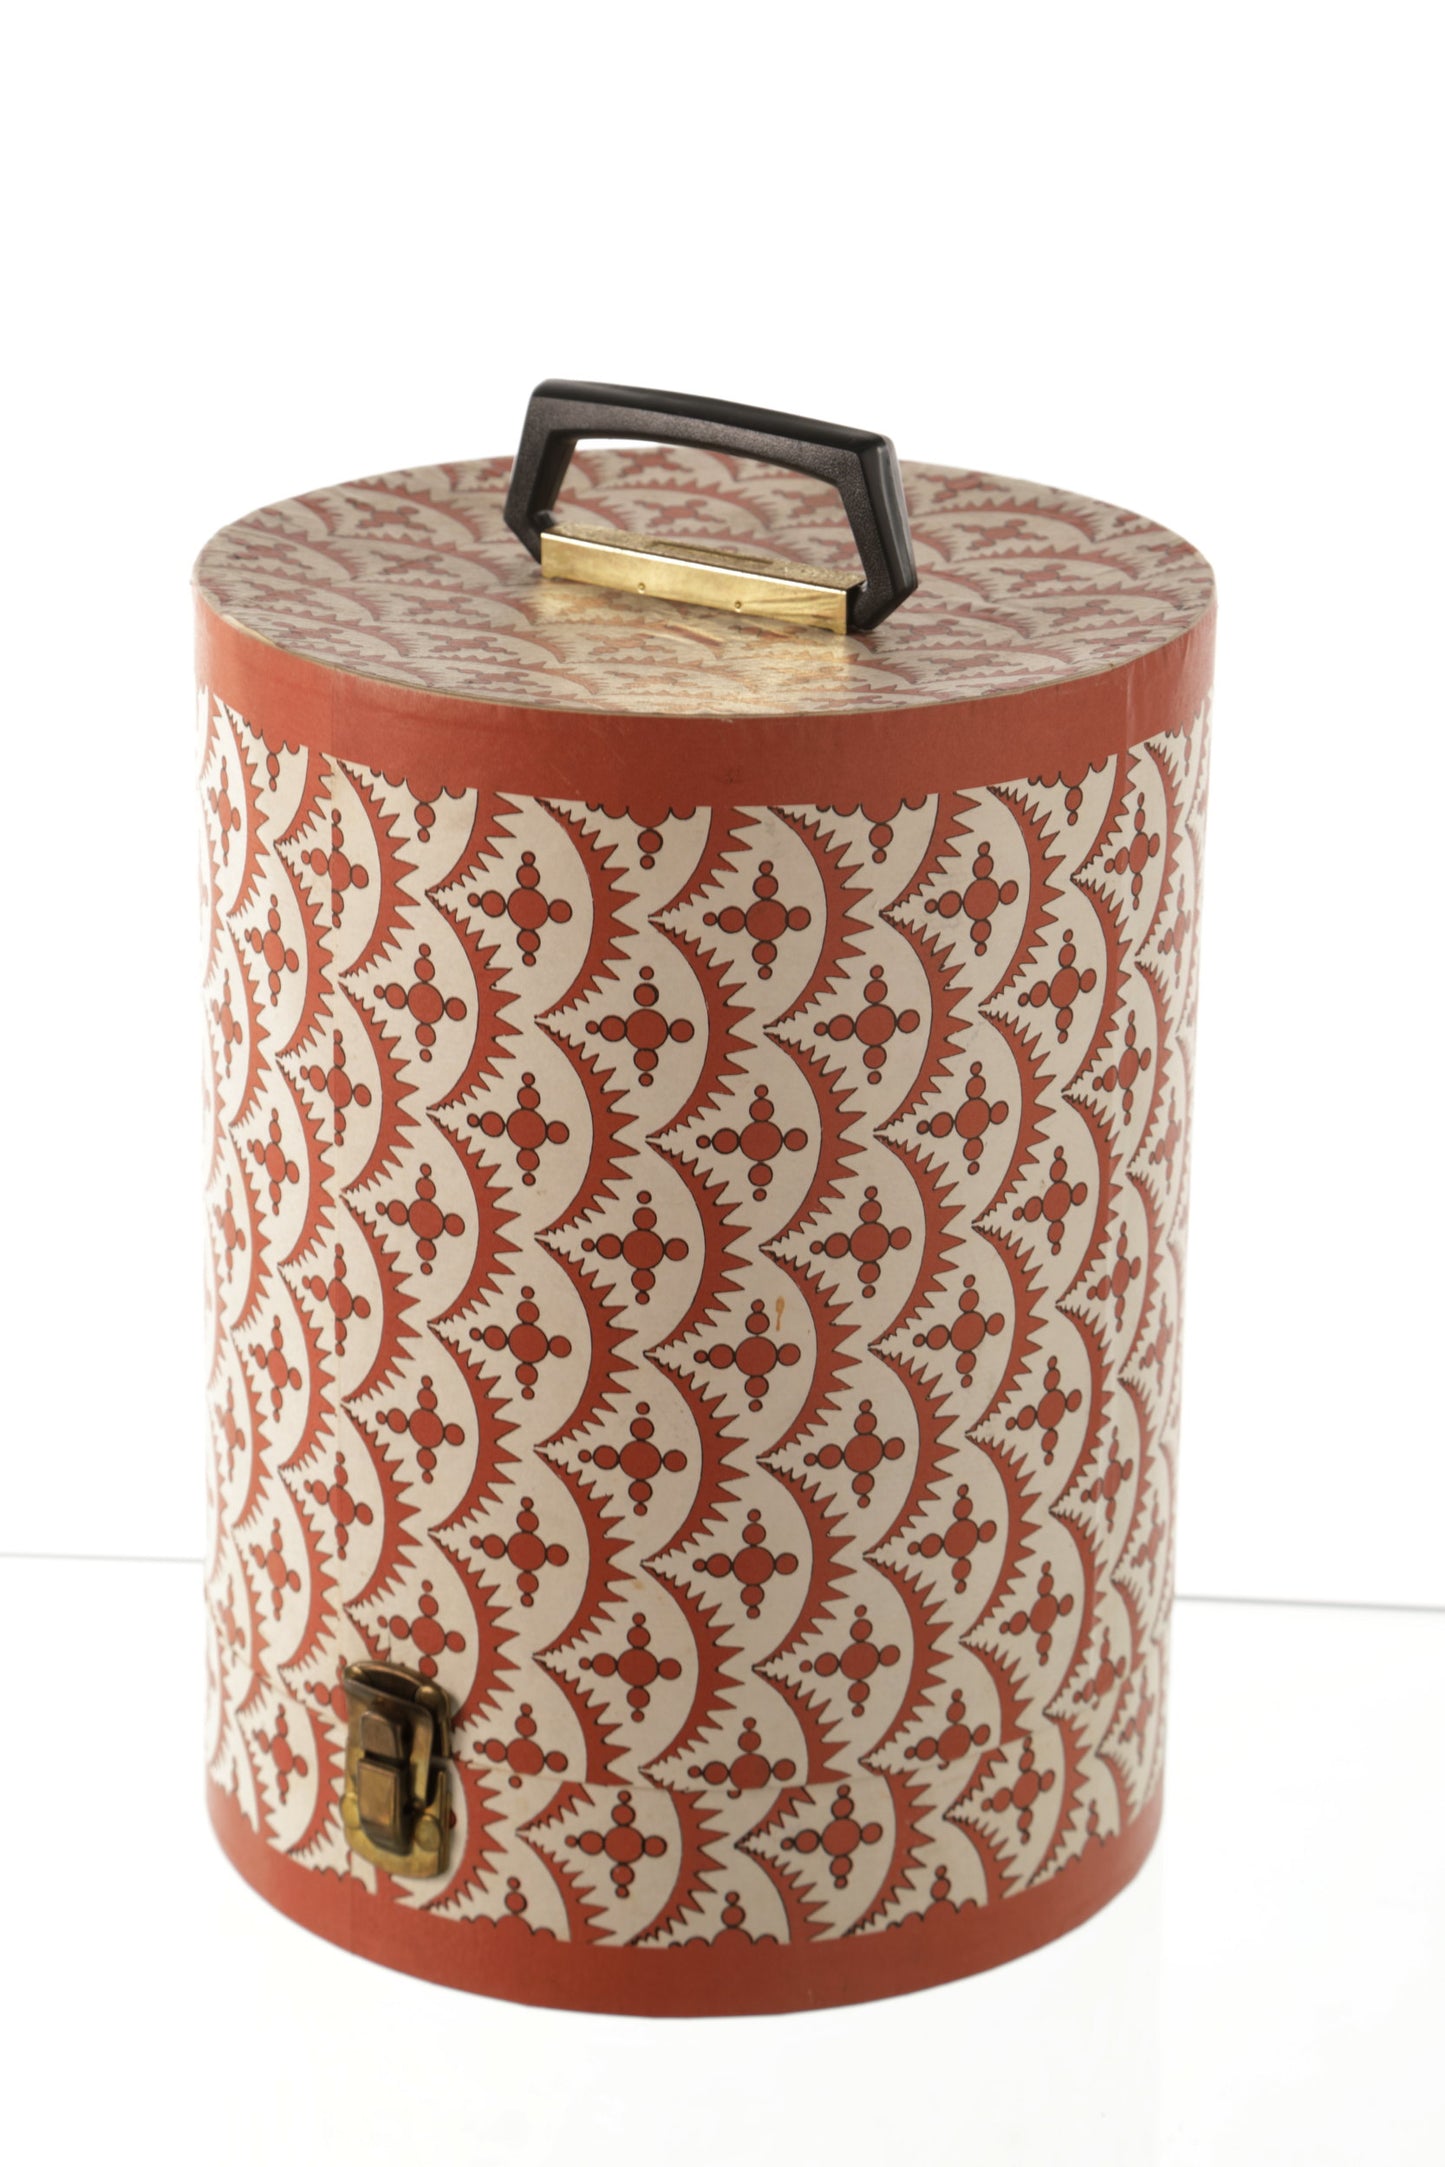 High hat box with printed decoration